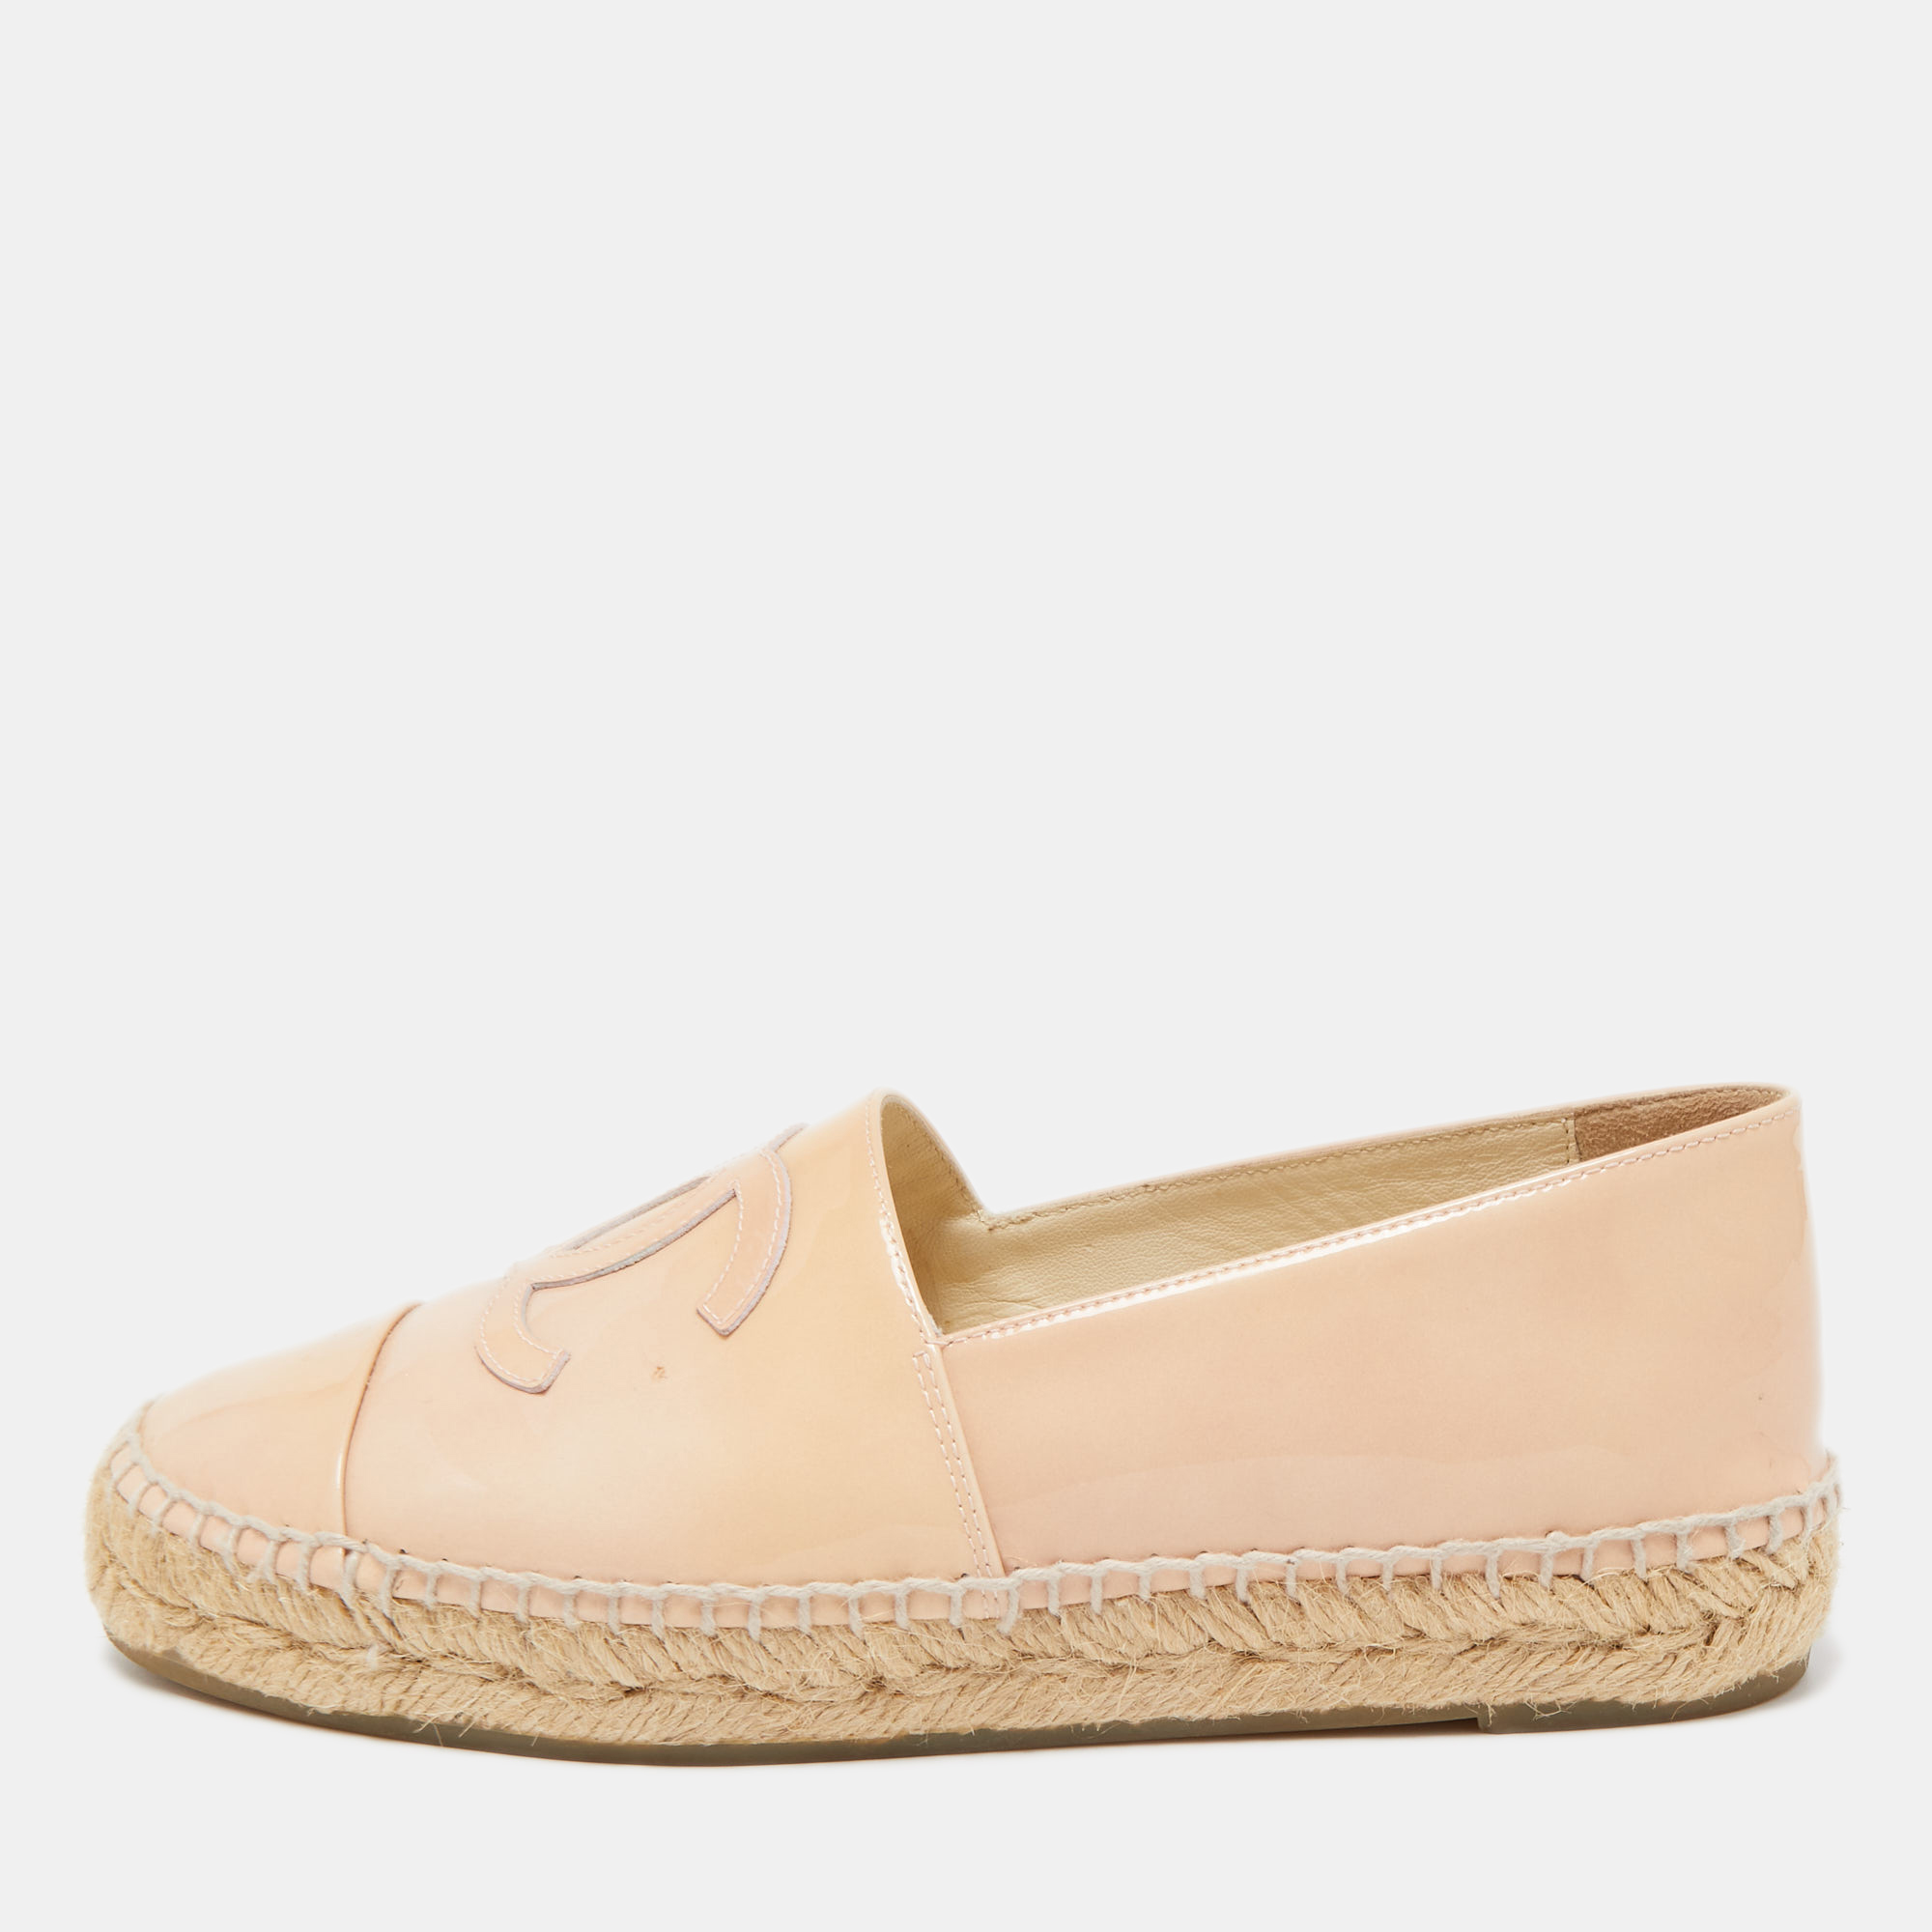 Pre-owned Chanel Light Pink Patent Leather Cc Espadrille Flats